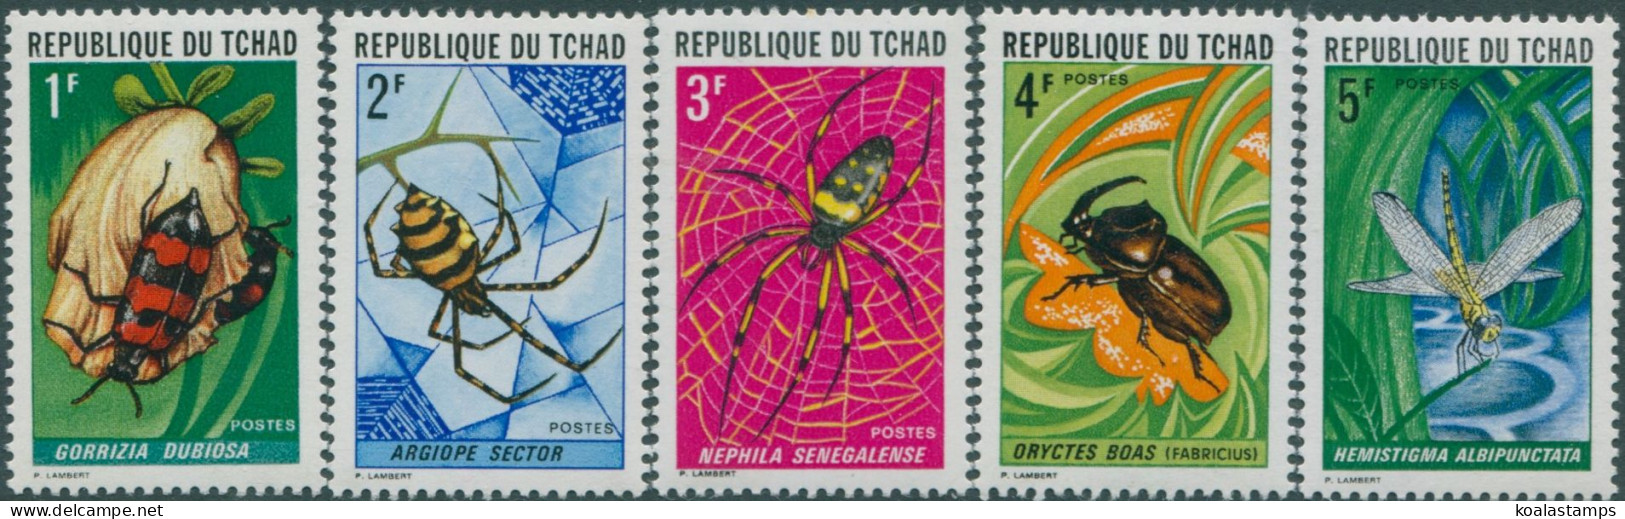 Chad 1972 SG358-362 Insects MLH - Tschad (1960-...)